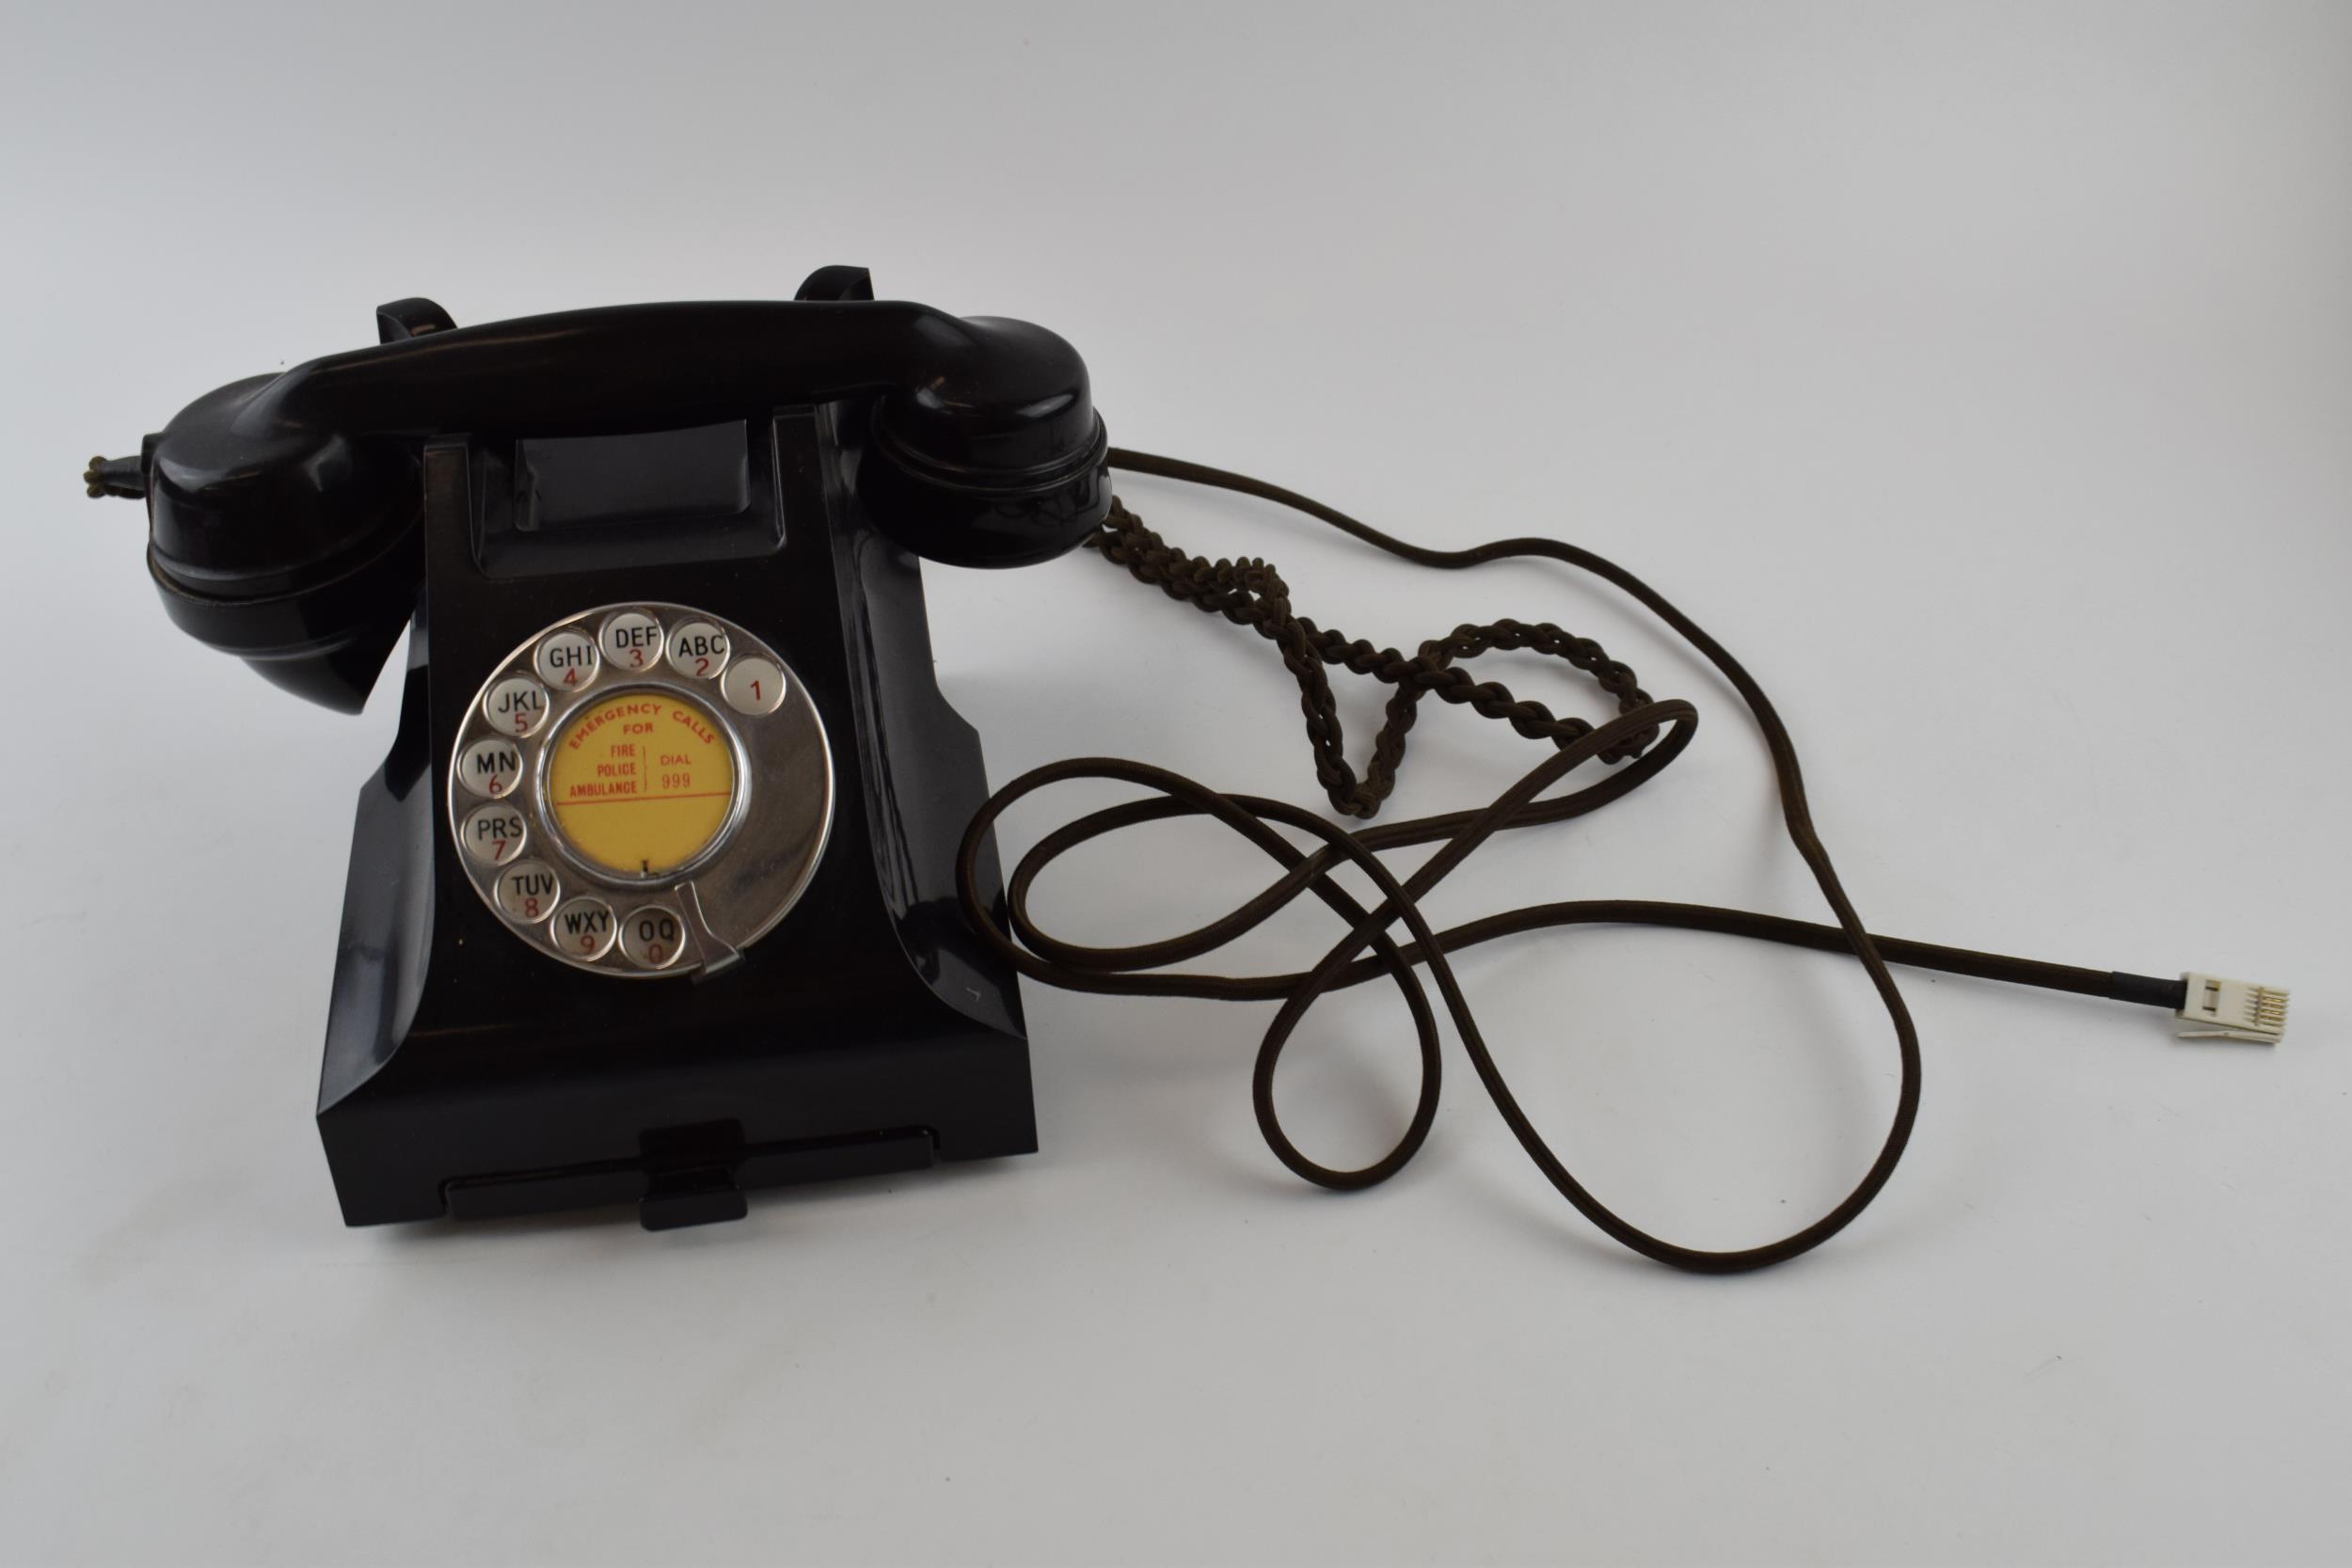 Vintage bakelite telephone and base, with wire. - Image 4 of 4